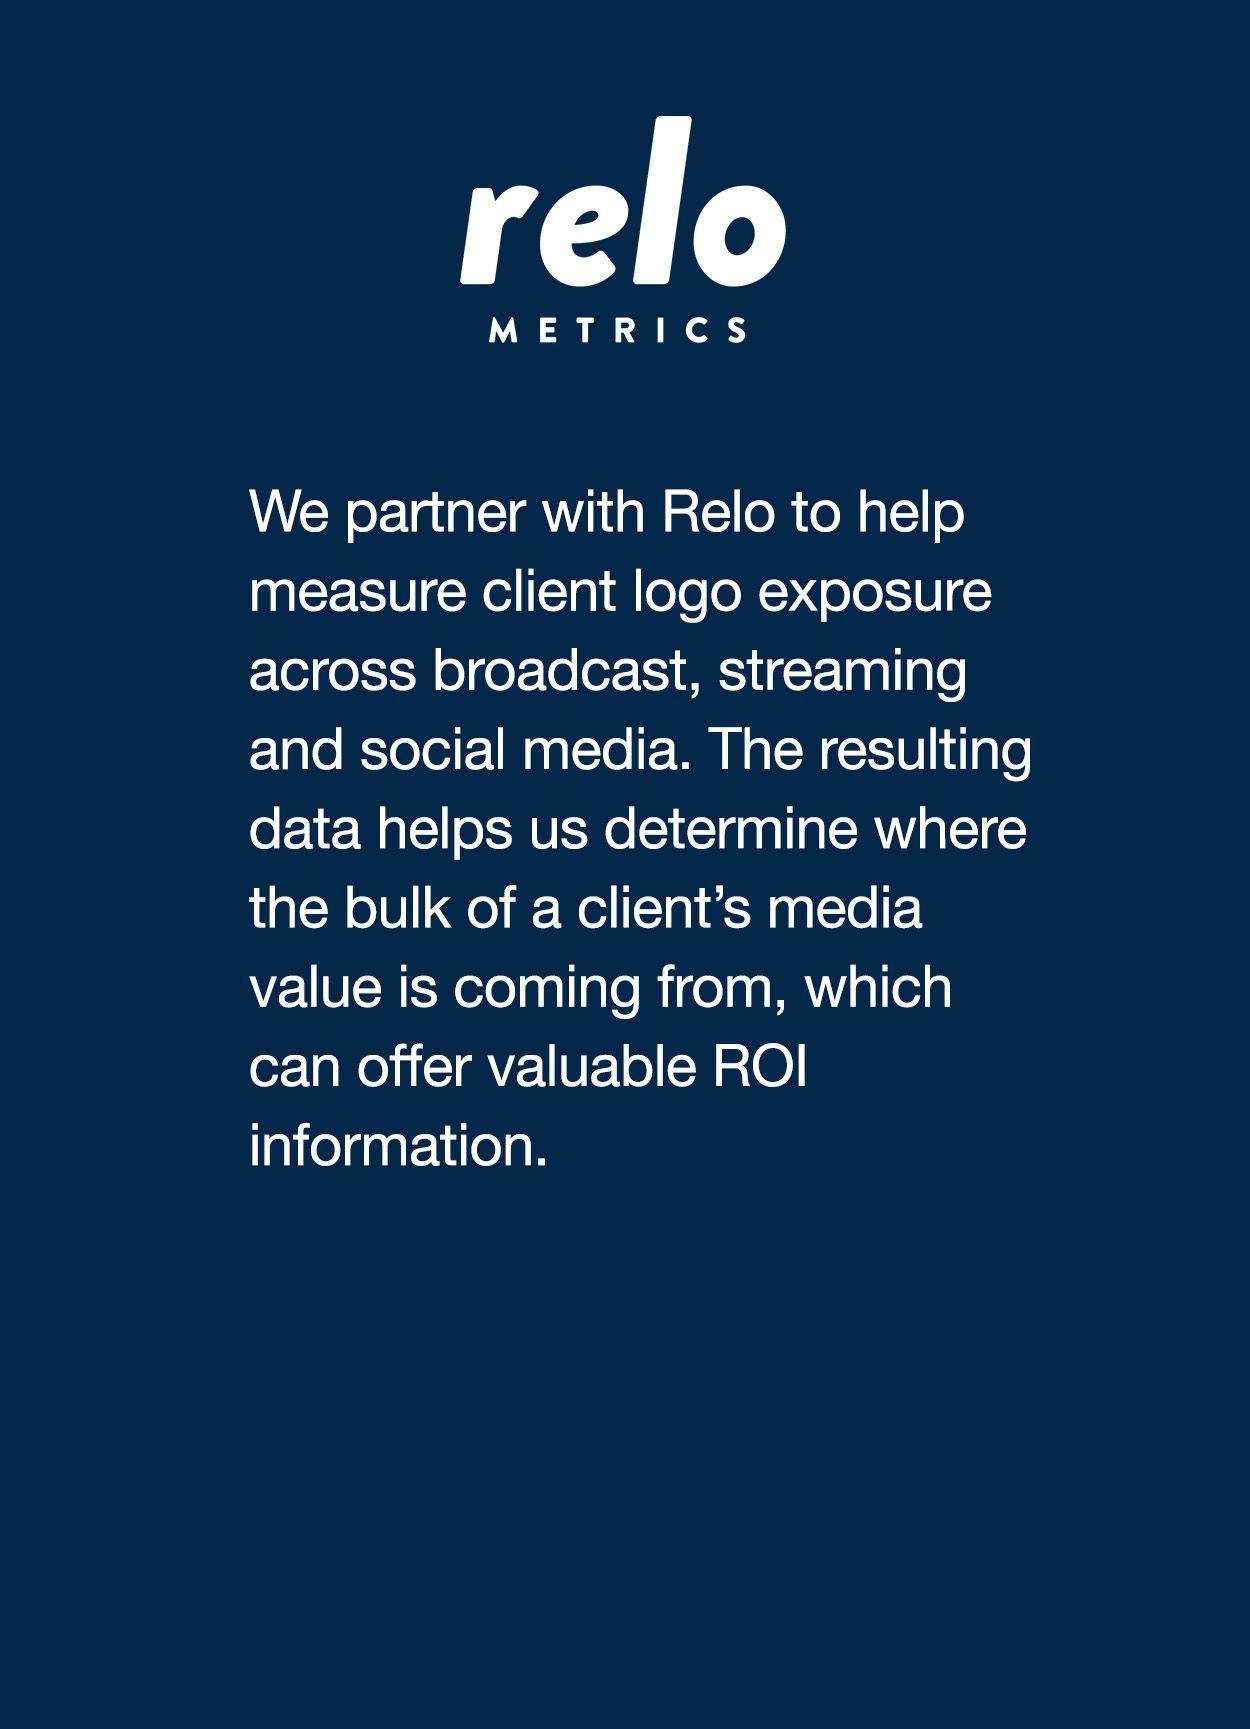 We partner with Relo to help measure client logo exposure across broadcast, streaming and social media. The resulting data helps us determine where the bulk of a client’s media value is coming from, which can offer valuable ROI information.